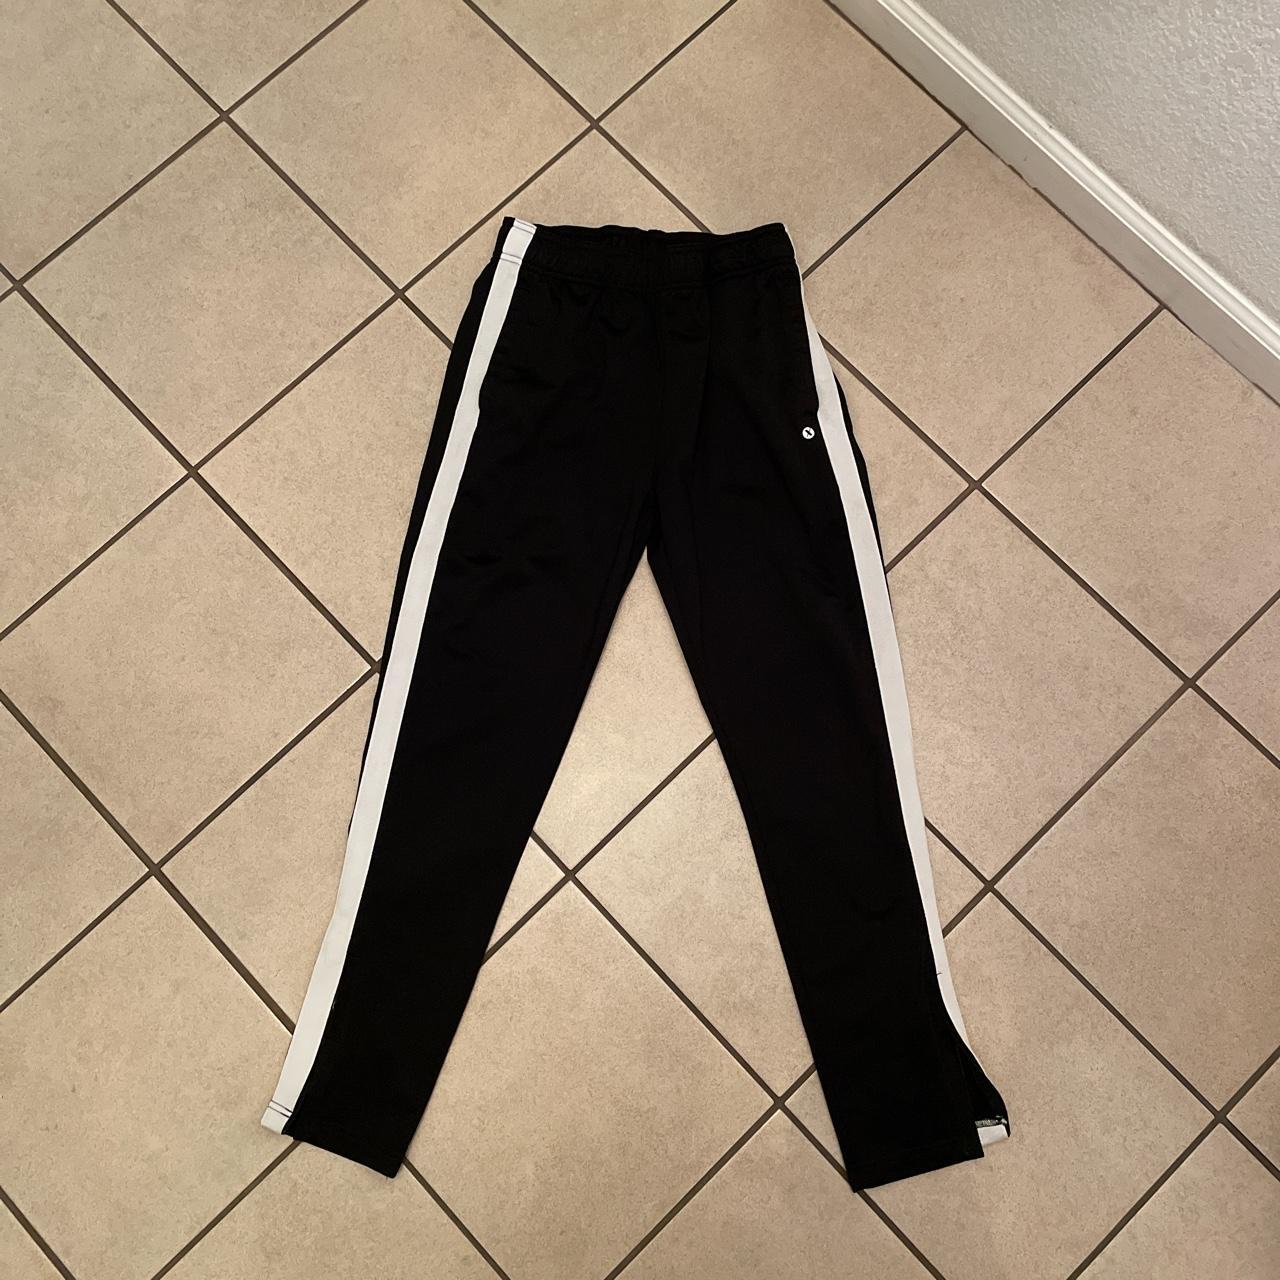 Xersion Pants and Sweater Size Small in Men's. Only - Depop